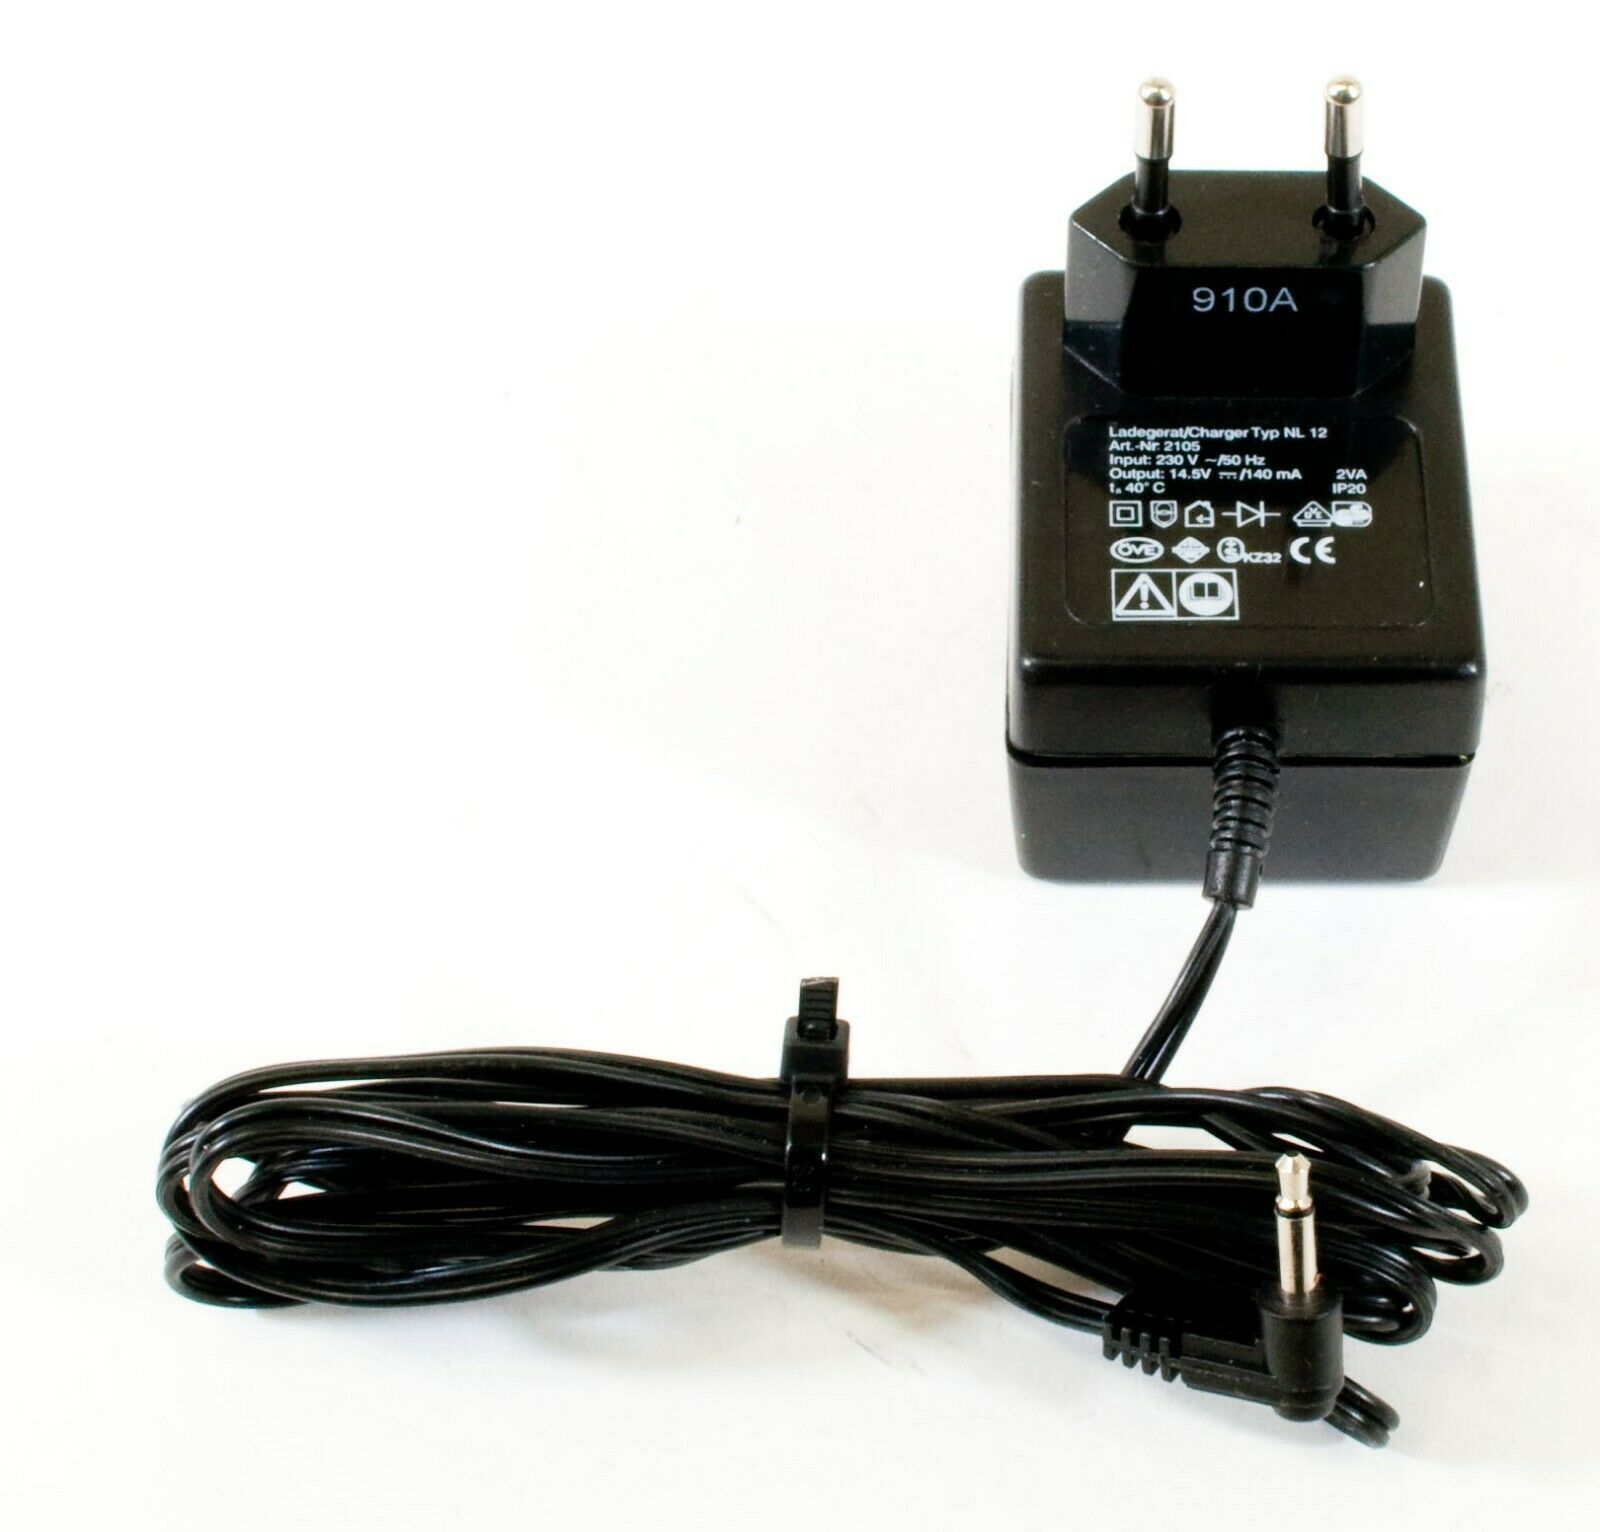 Gardena Charger Typ NL 12 AC Adapter 14.5V 140mA Power Supply Output Current: 140 mA Voltage: 14.5 V MPN: Typ NL 1